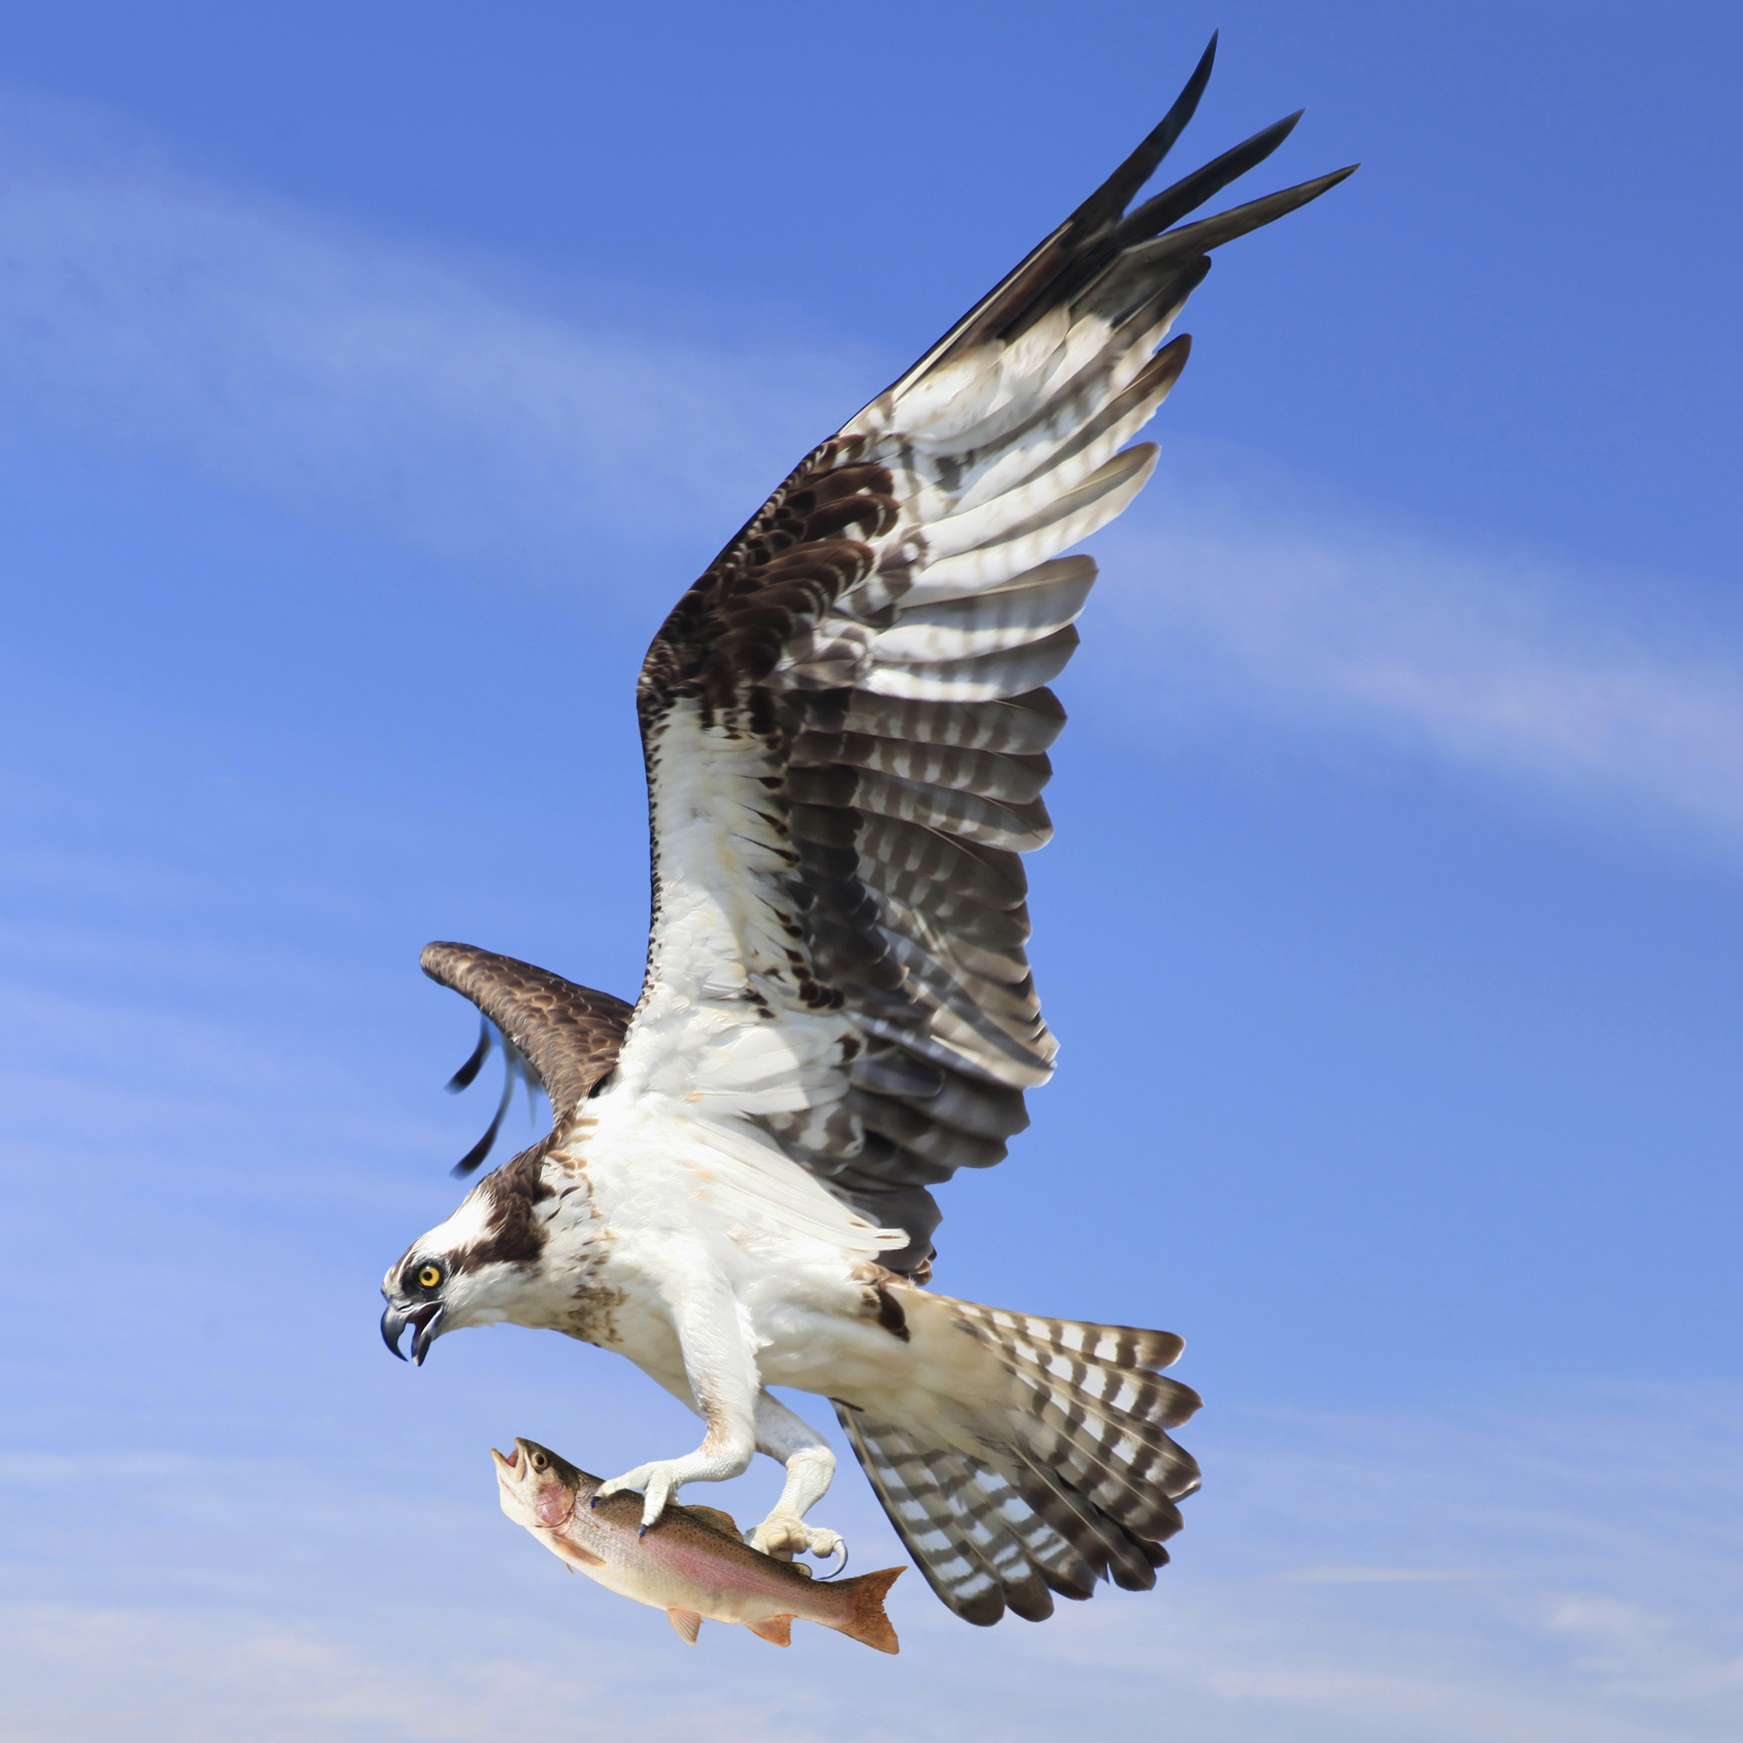 An osprey soaring against a blue sky with a fish in its talons.